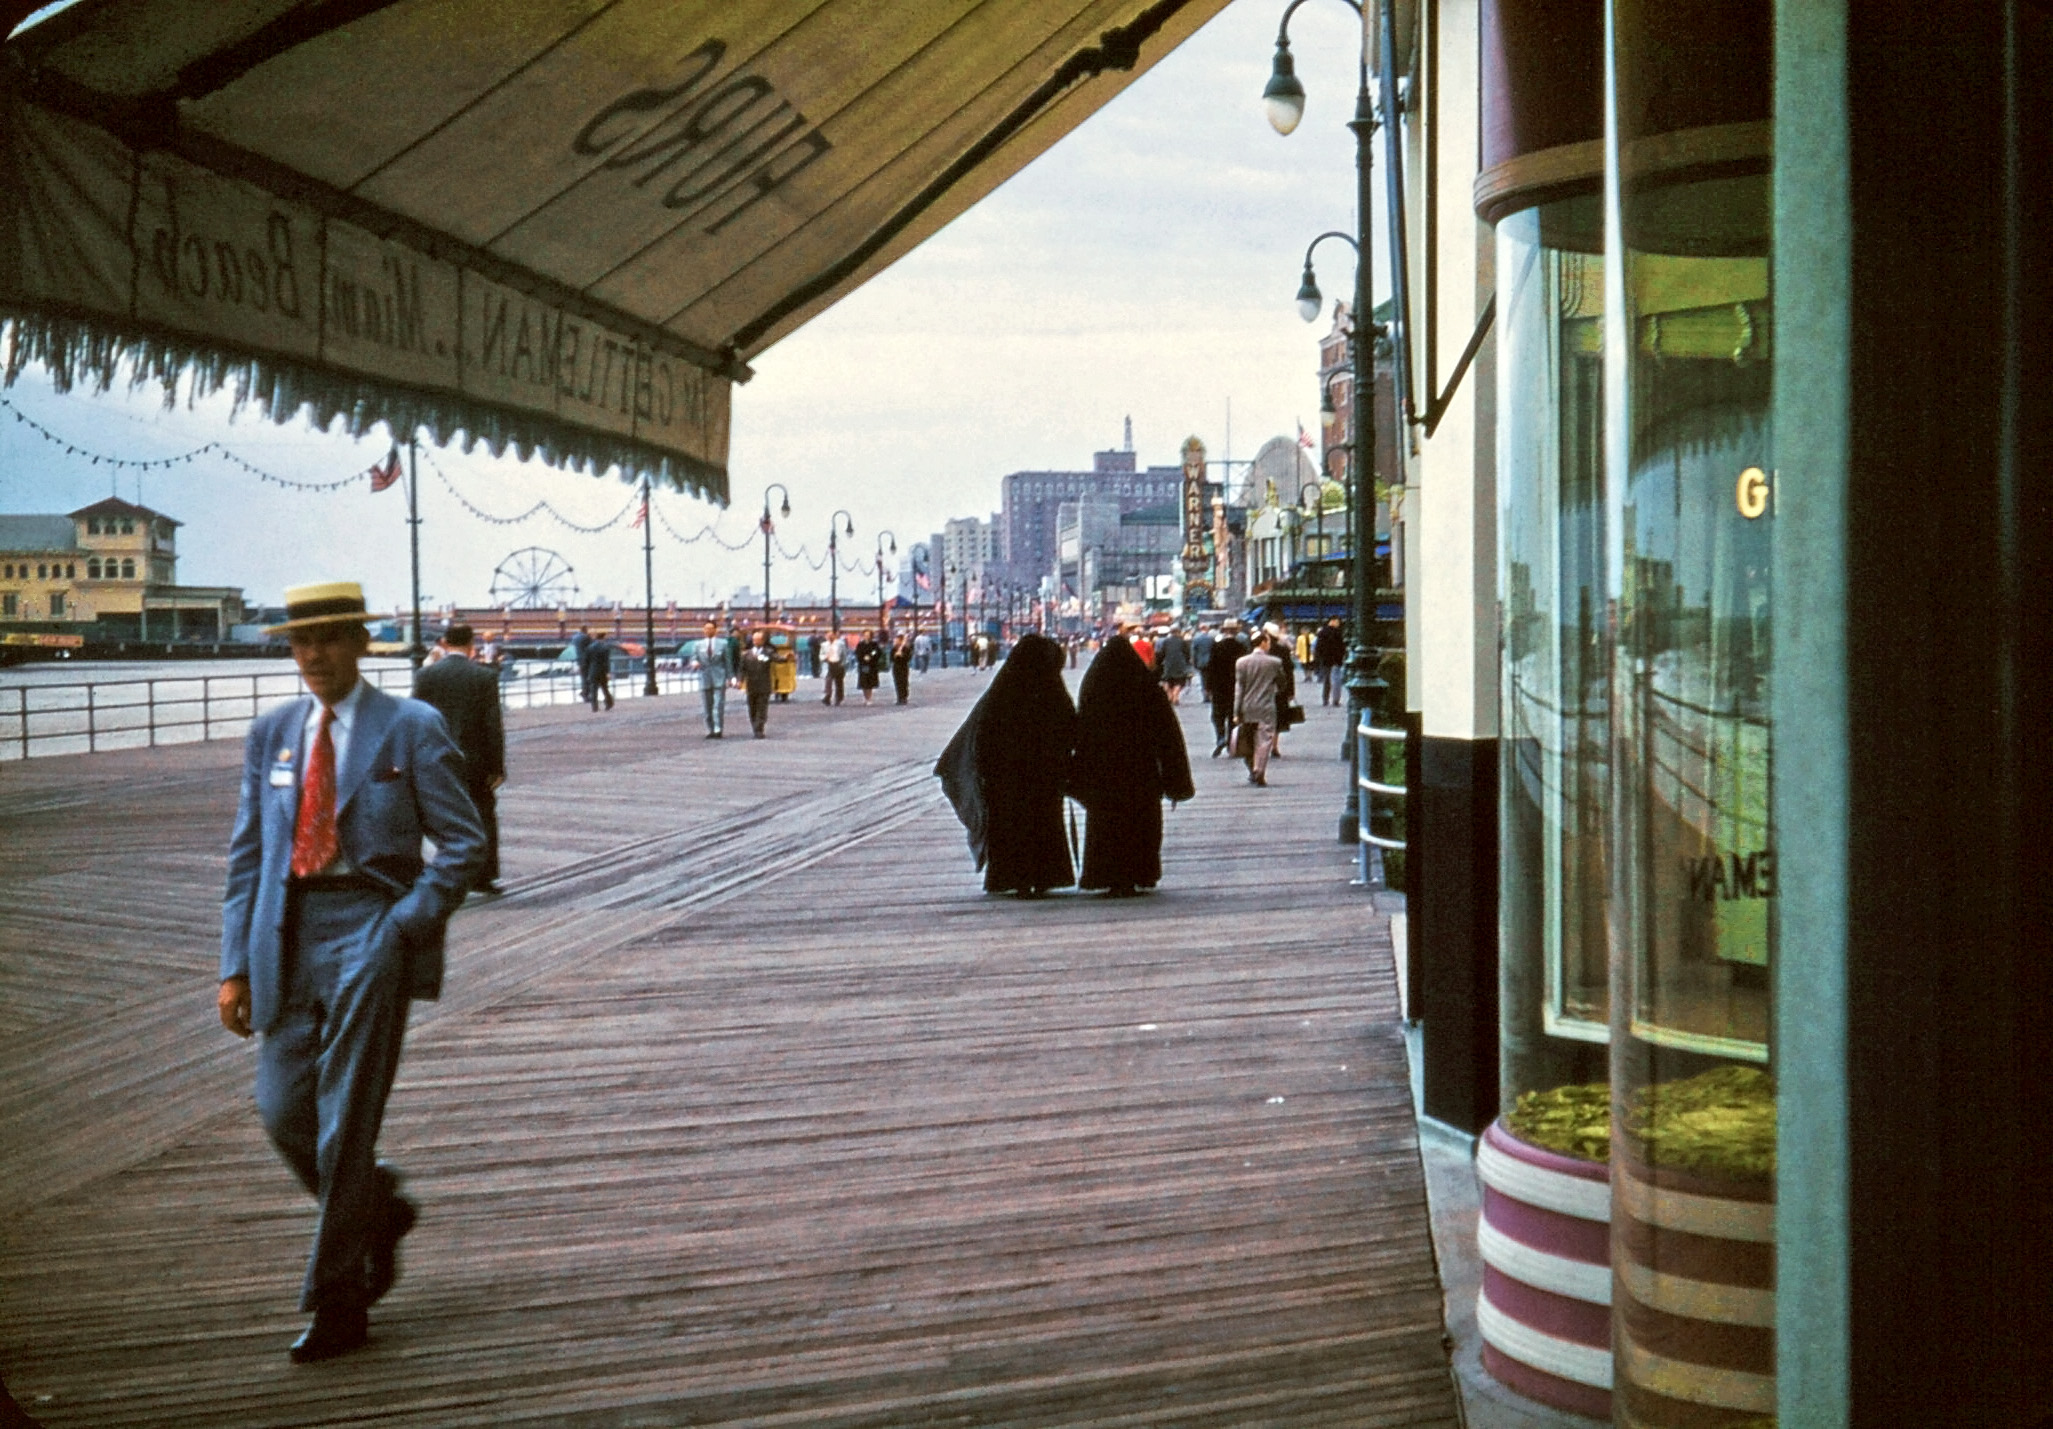 My grandfather won a trip to Atlantic City in 1956.  He bought a small camera and began taking hundreds of pictures, mostly of life in and around eastern Ohio.  This is from one of his Kodachrome slides. View full size.